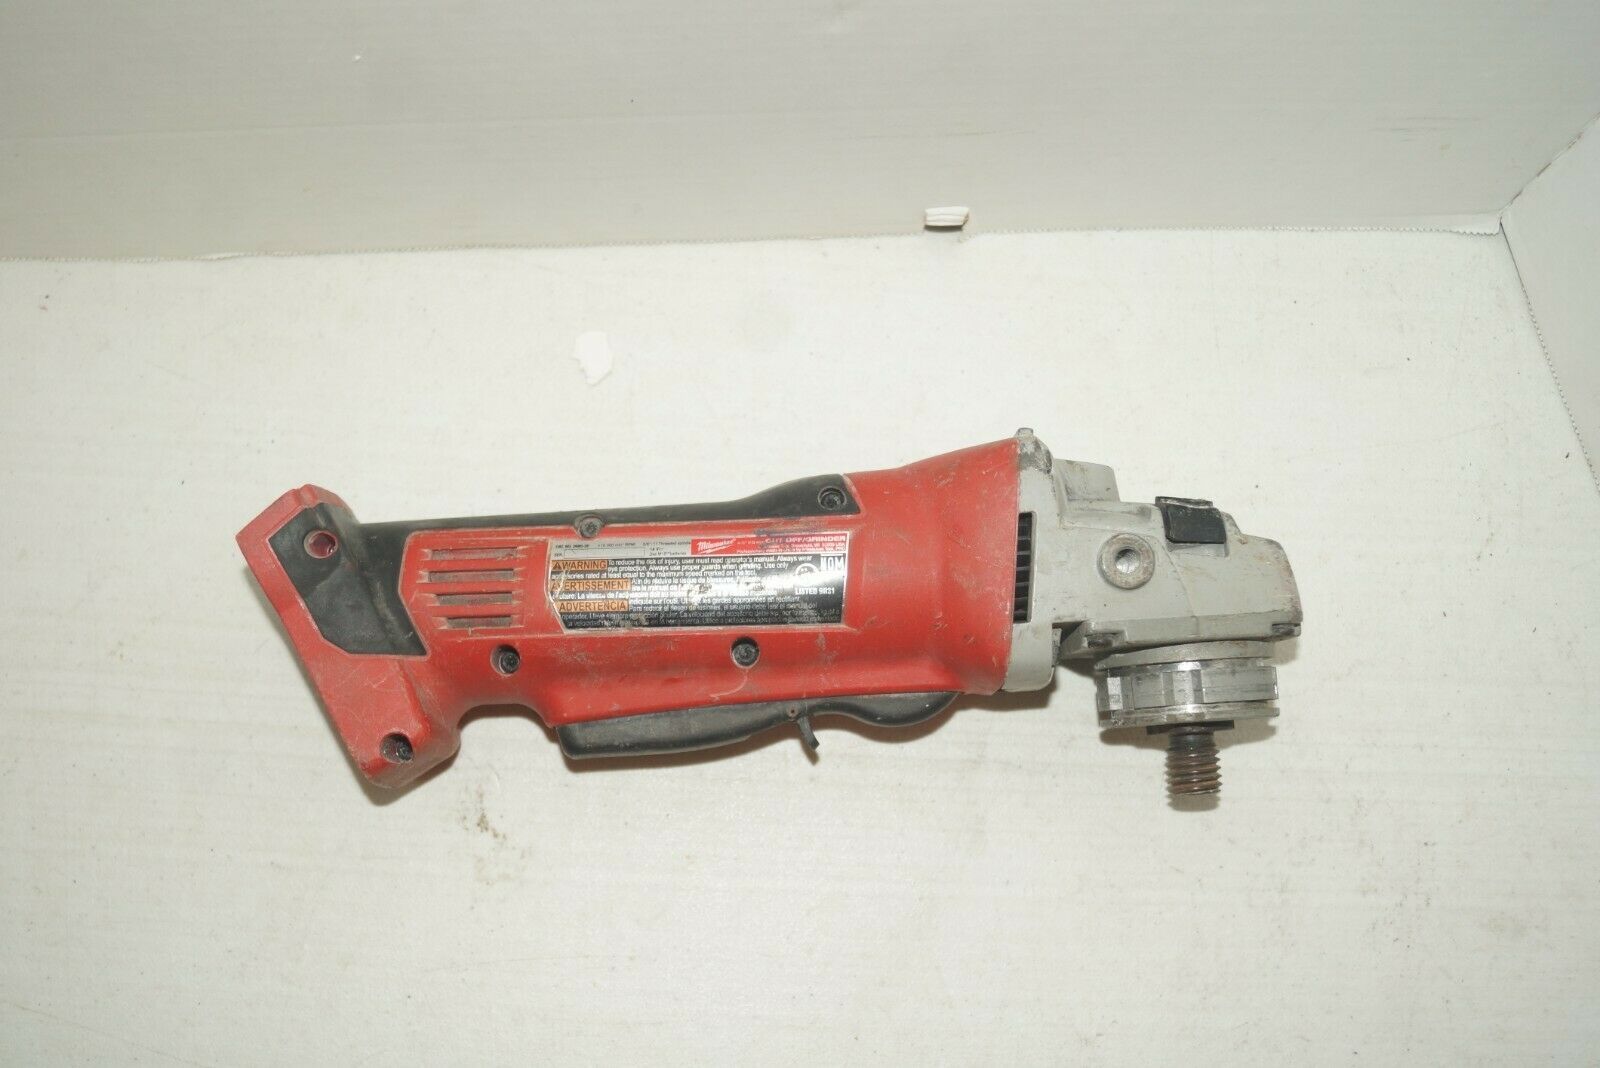 Milwaukee 2680-20 18-Volt Cordless 4-1/2" Grinder FOR PARTS NOT WORKING FP798 